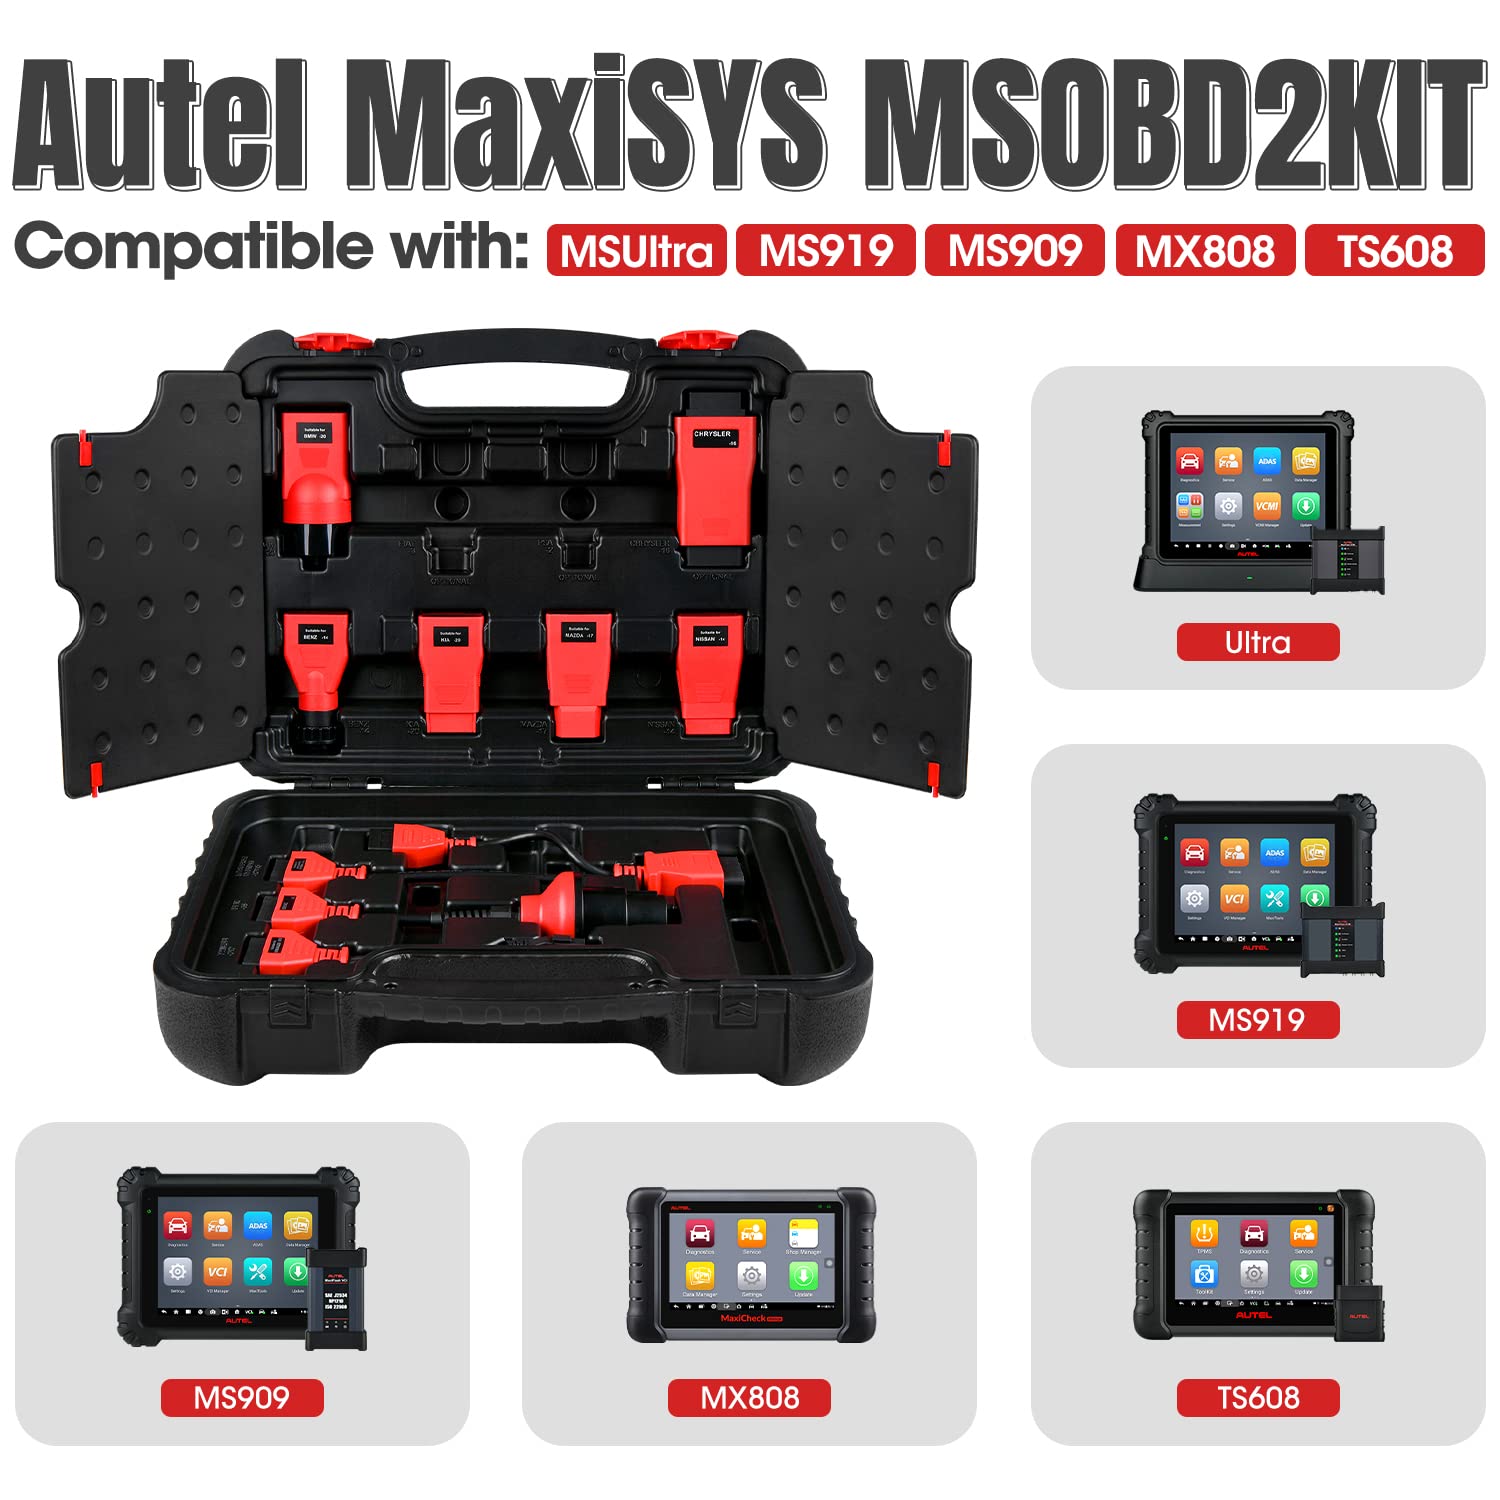 Autel MSOBD2KIT Non-OBDII Adapter Kit compatible with the MSUltra, MS919, MS909, TS608 and MX808 scanner